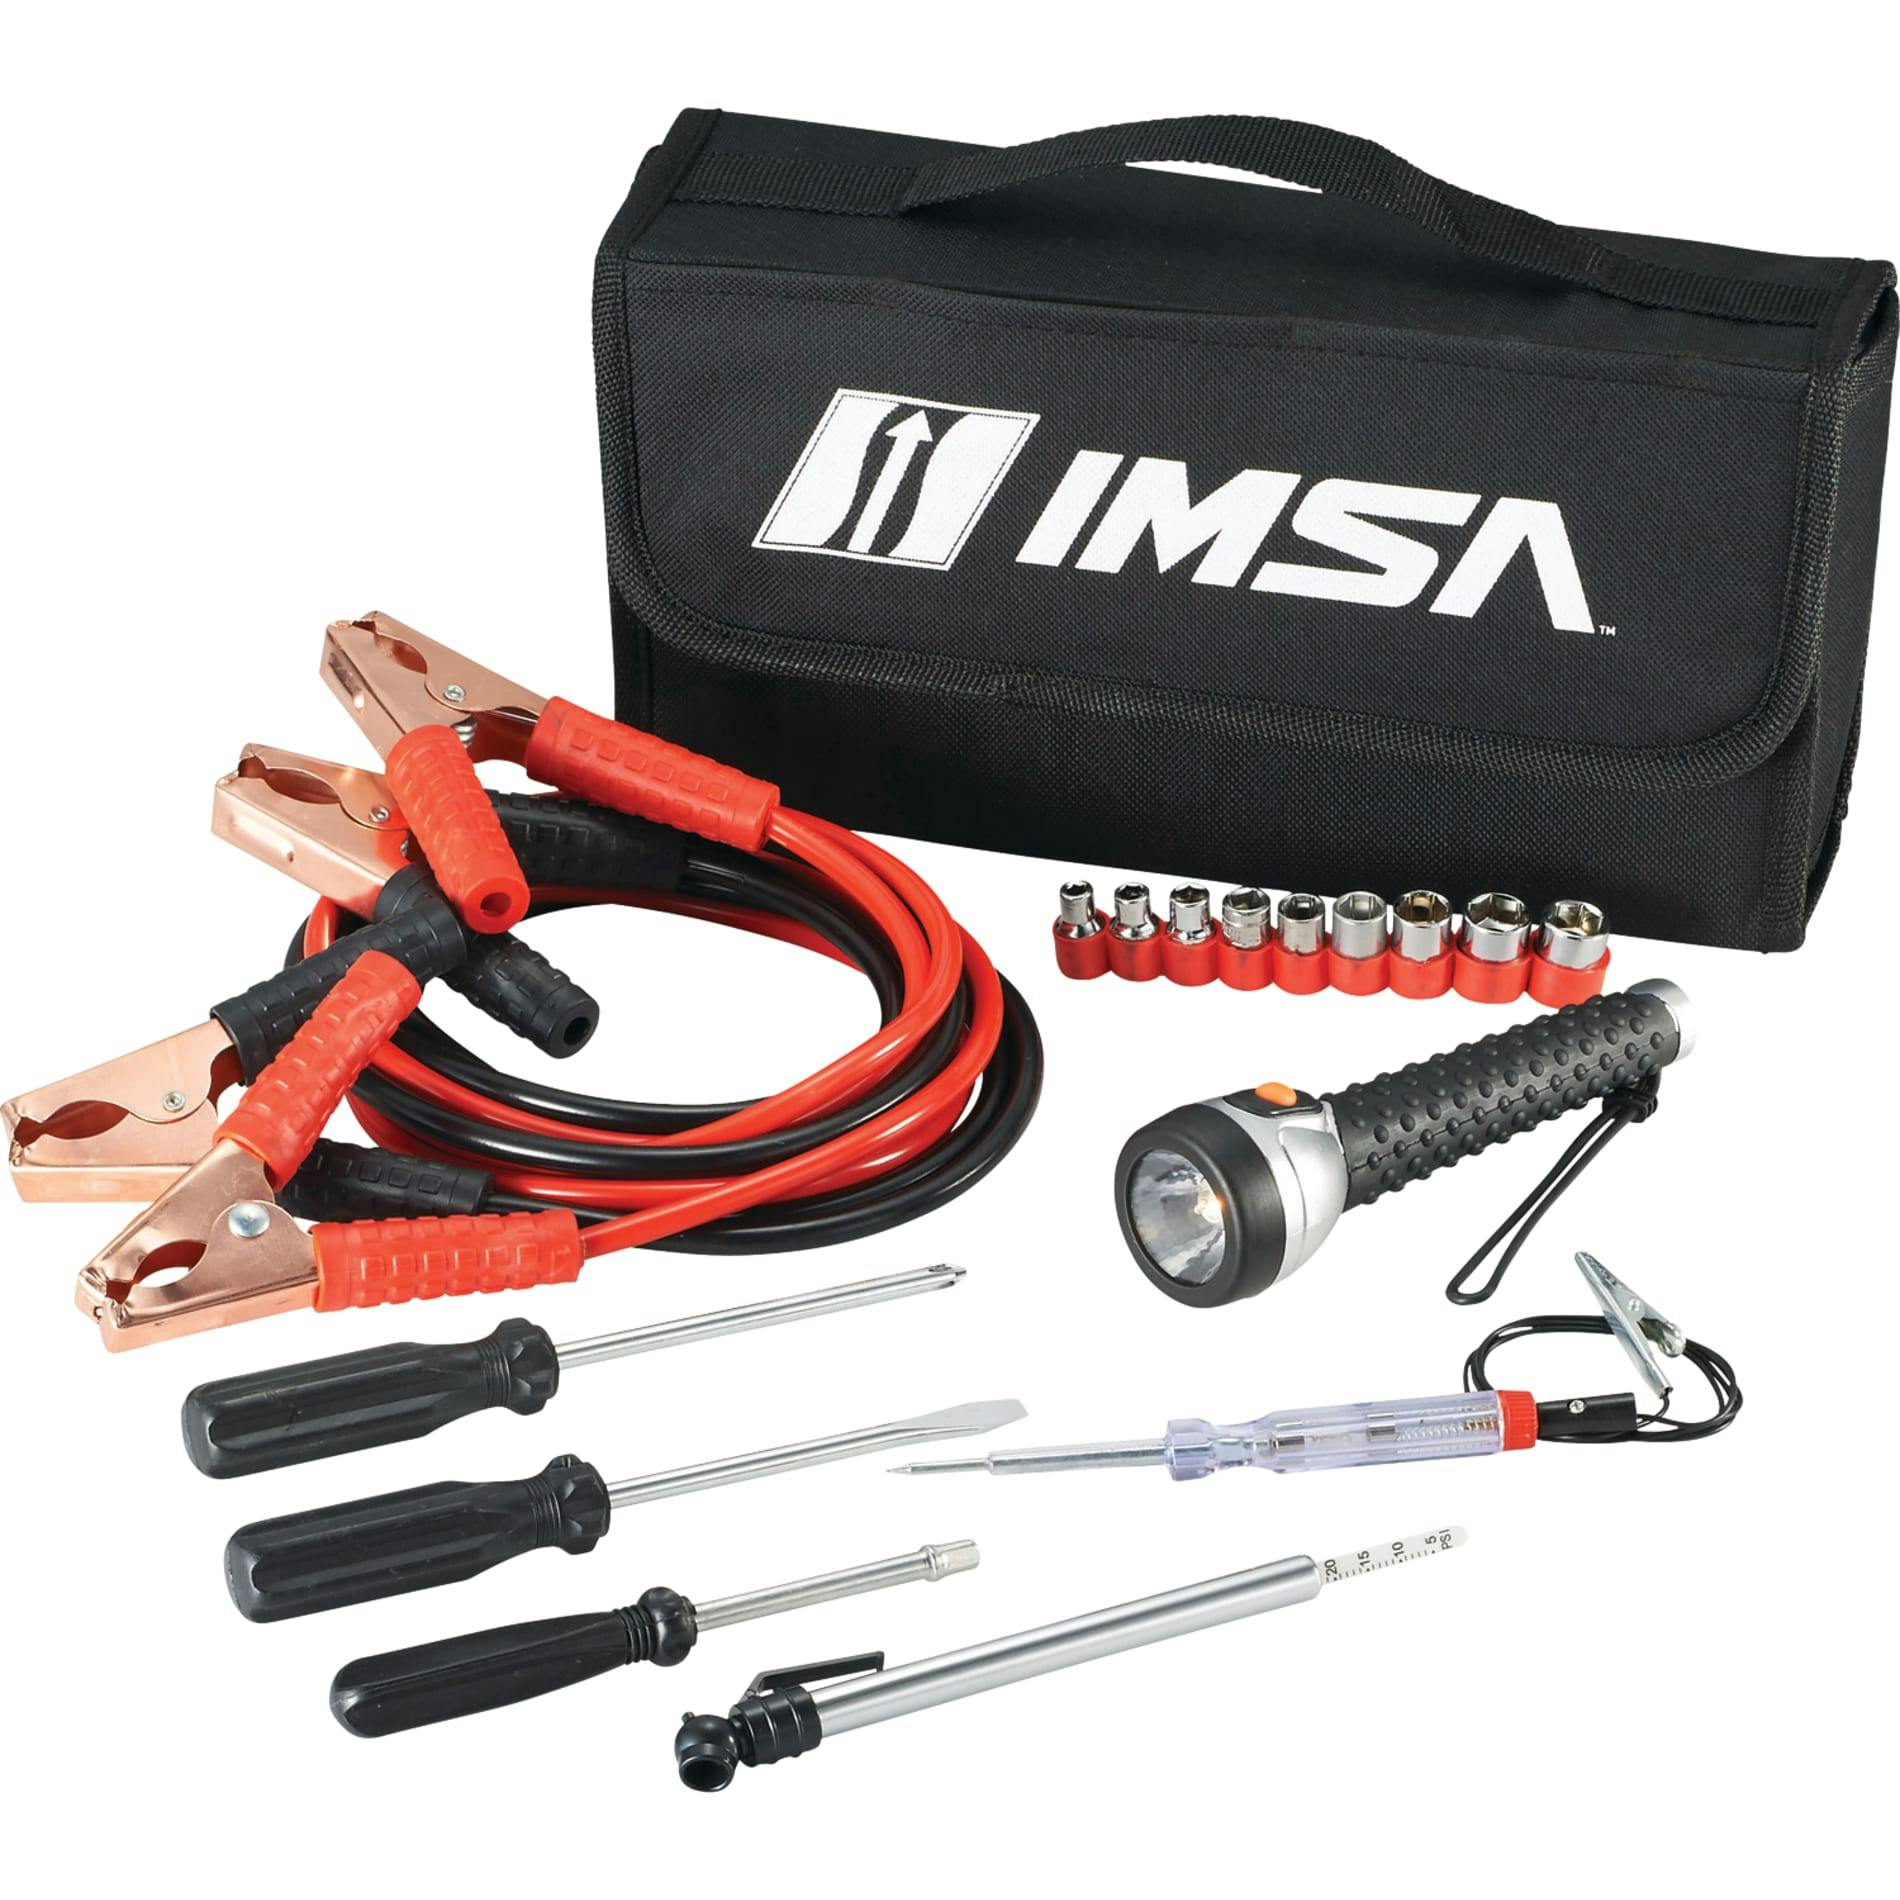 Highway Jumper Cable and Tools Set - additional Image 7